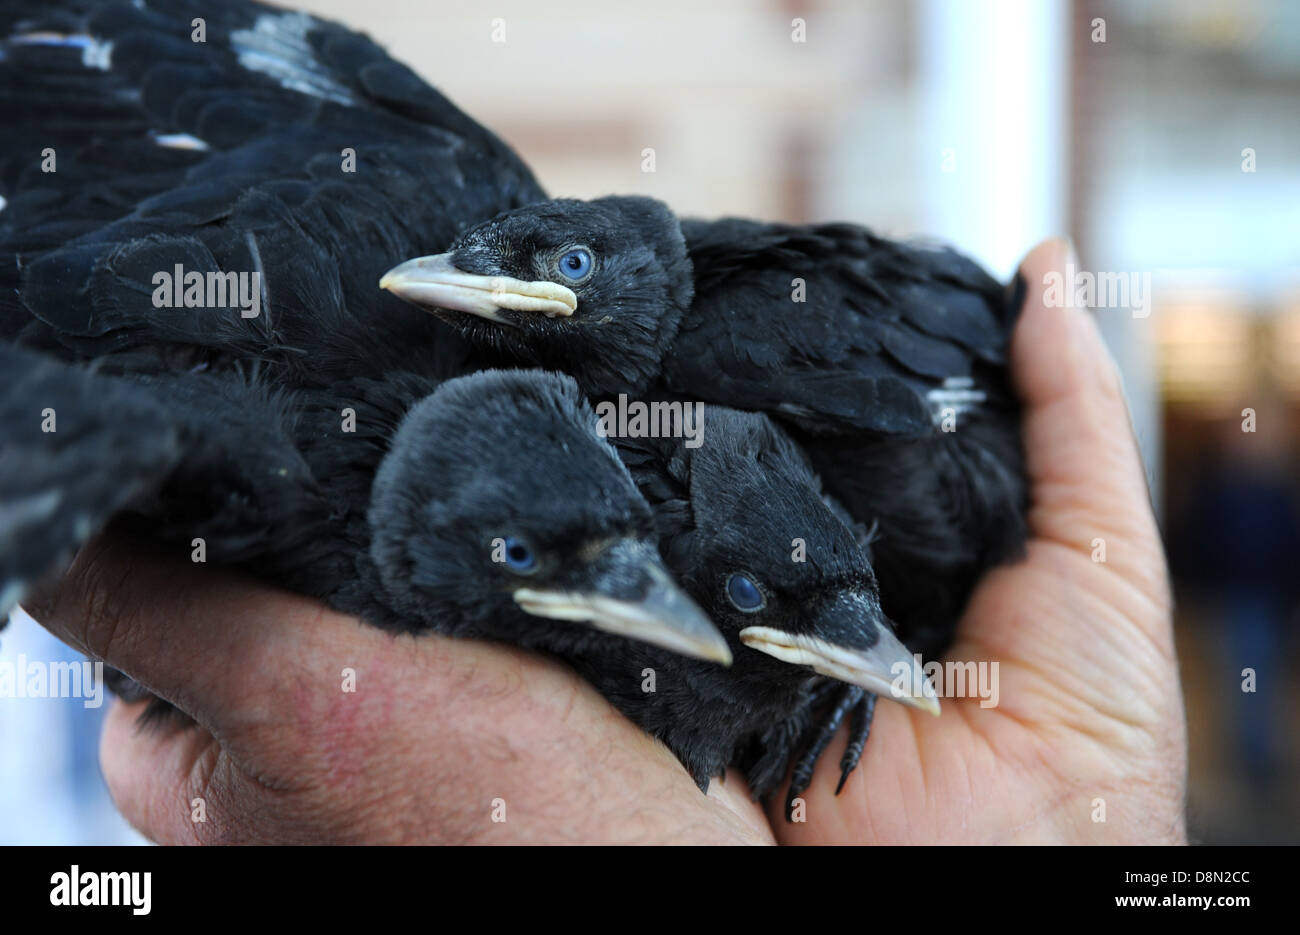 Young Jackdaw chicks in a hand scientific name Corvus monedula Stock Photo